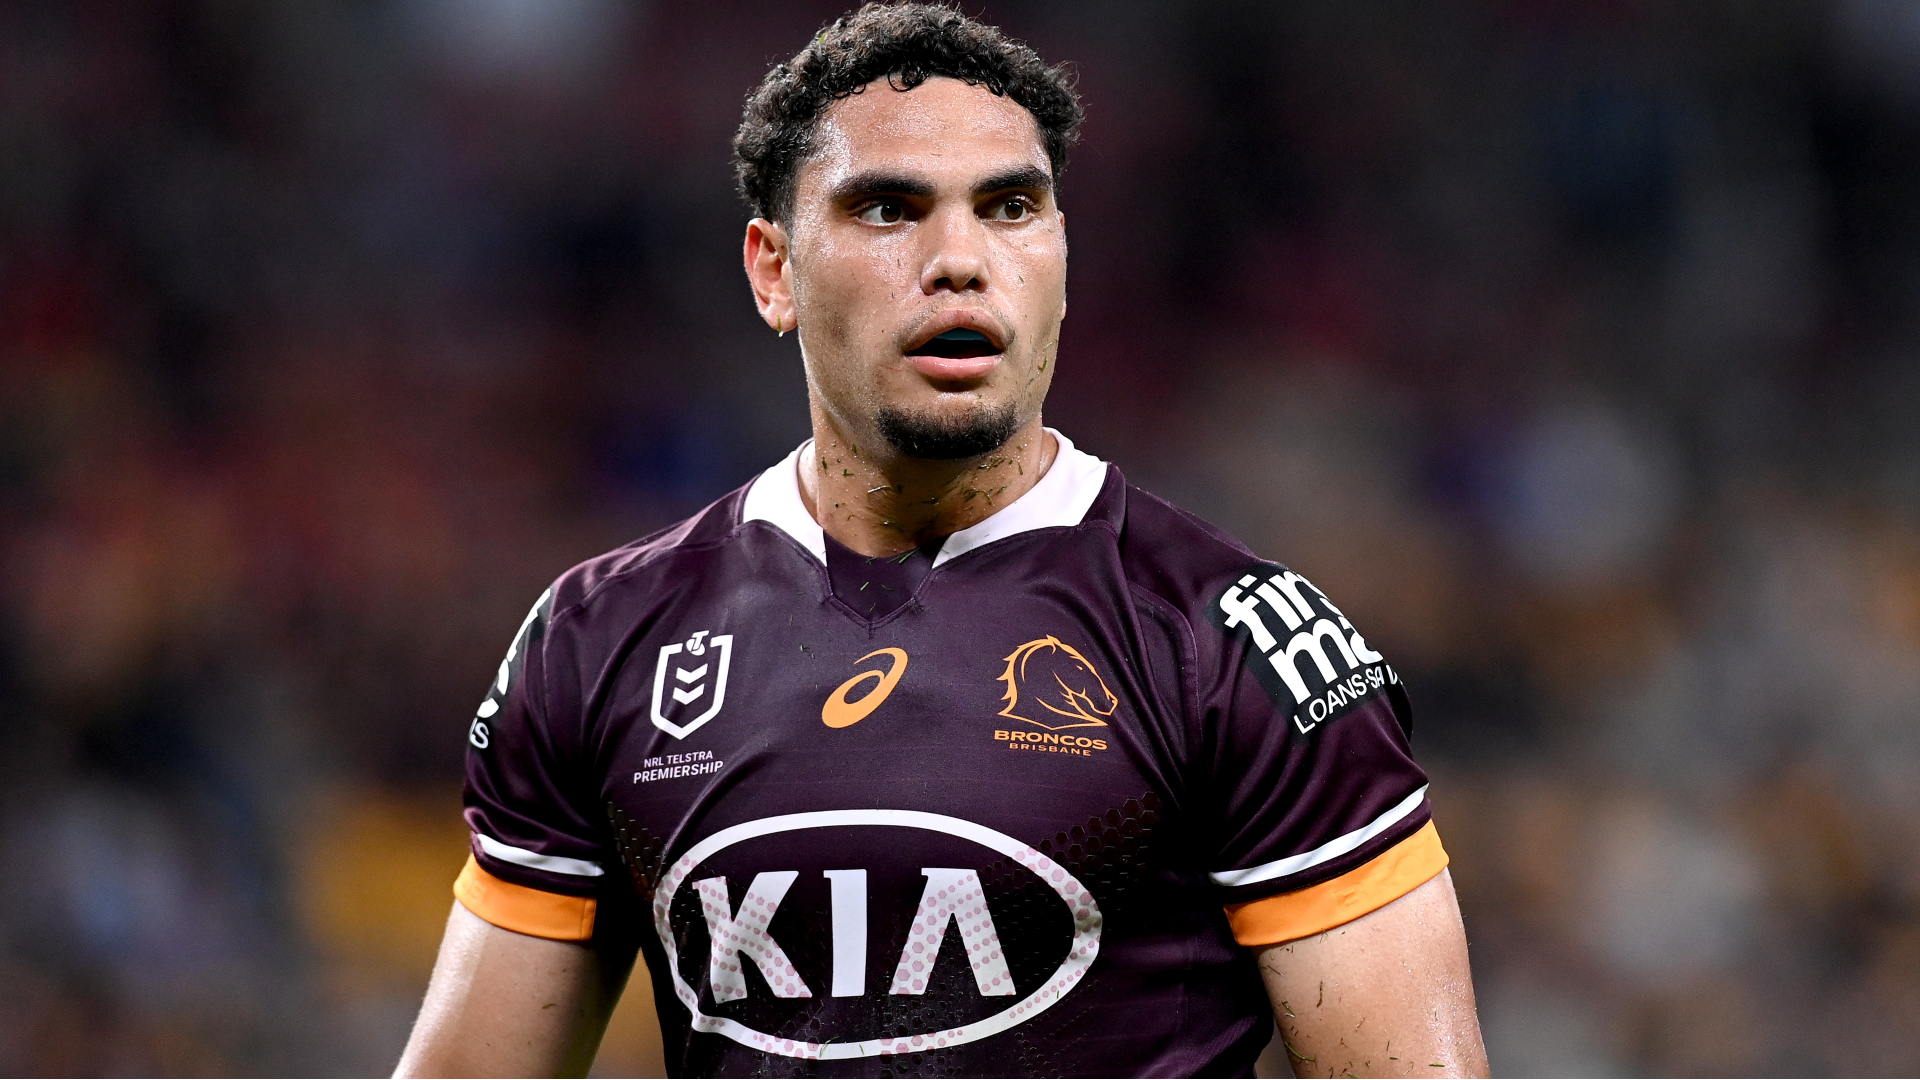 EXCLUSIVE: Why Melbourne Storm switch would take Xavier Coates to the next level